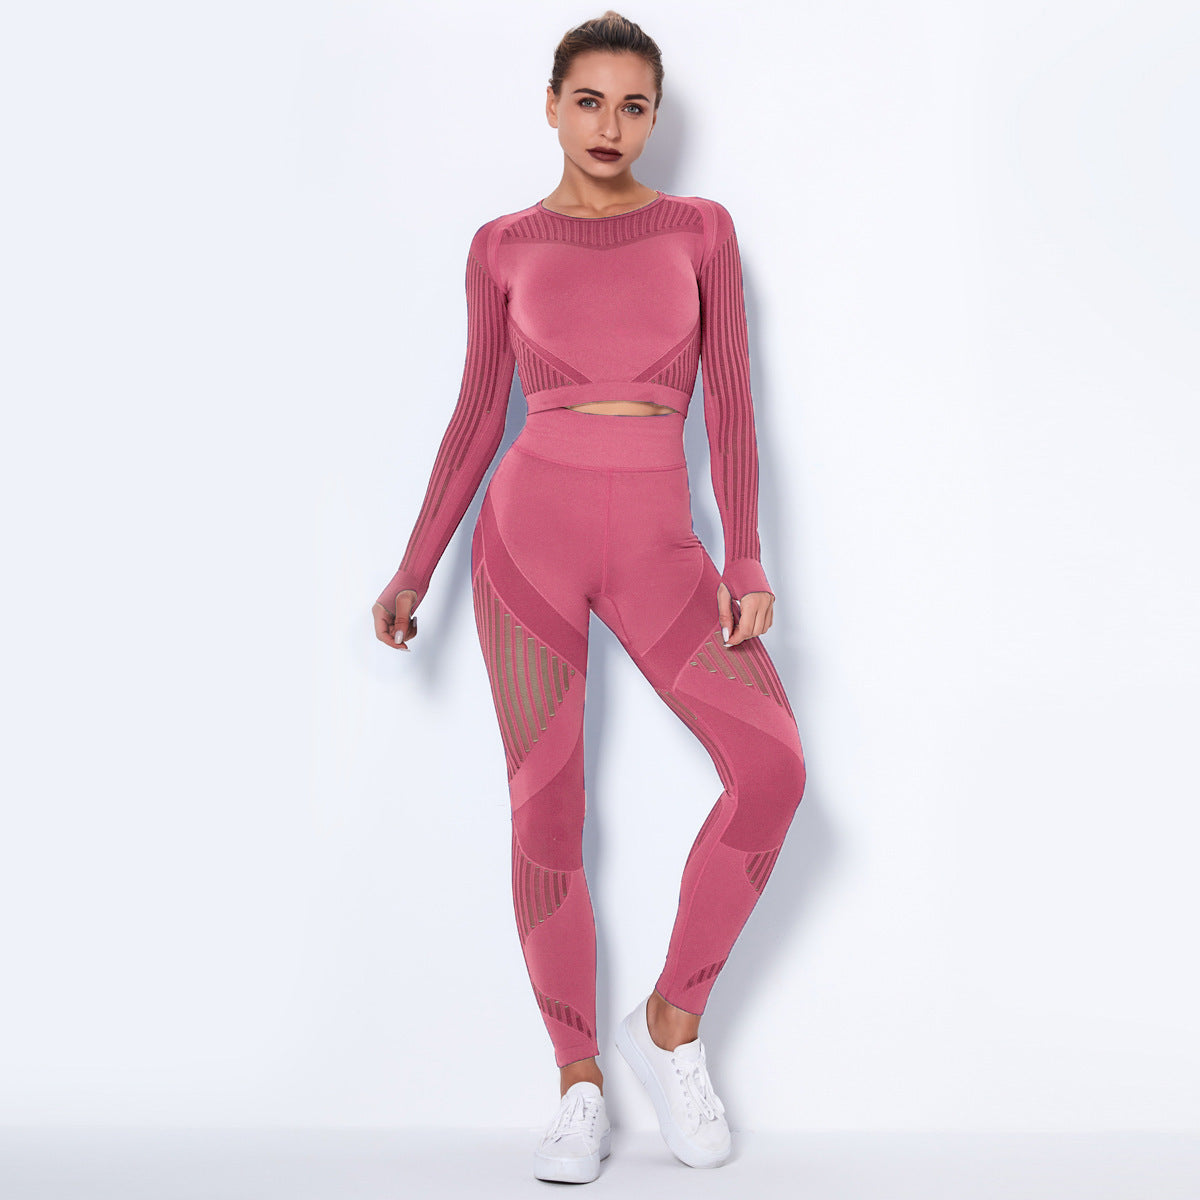 SORTYGO - Knitted Long Sleeve Yoga Wear Suit in Watermelon Red